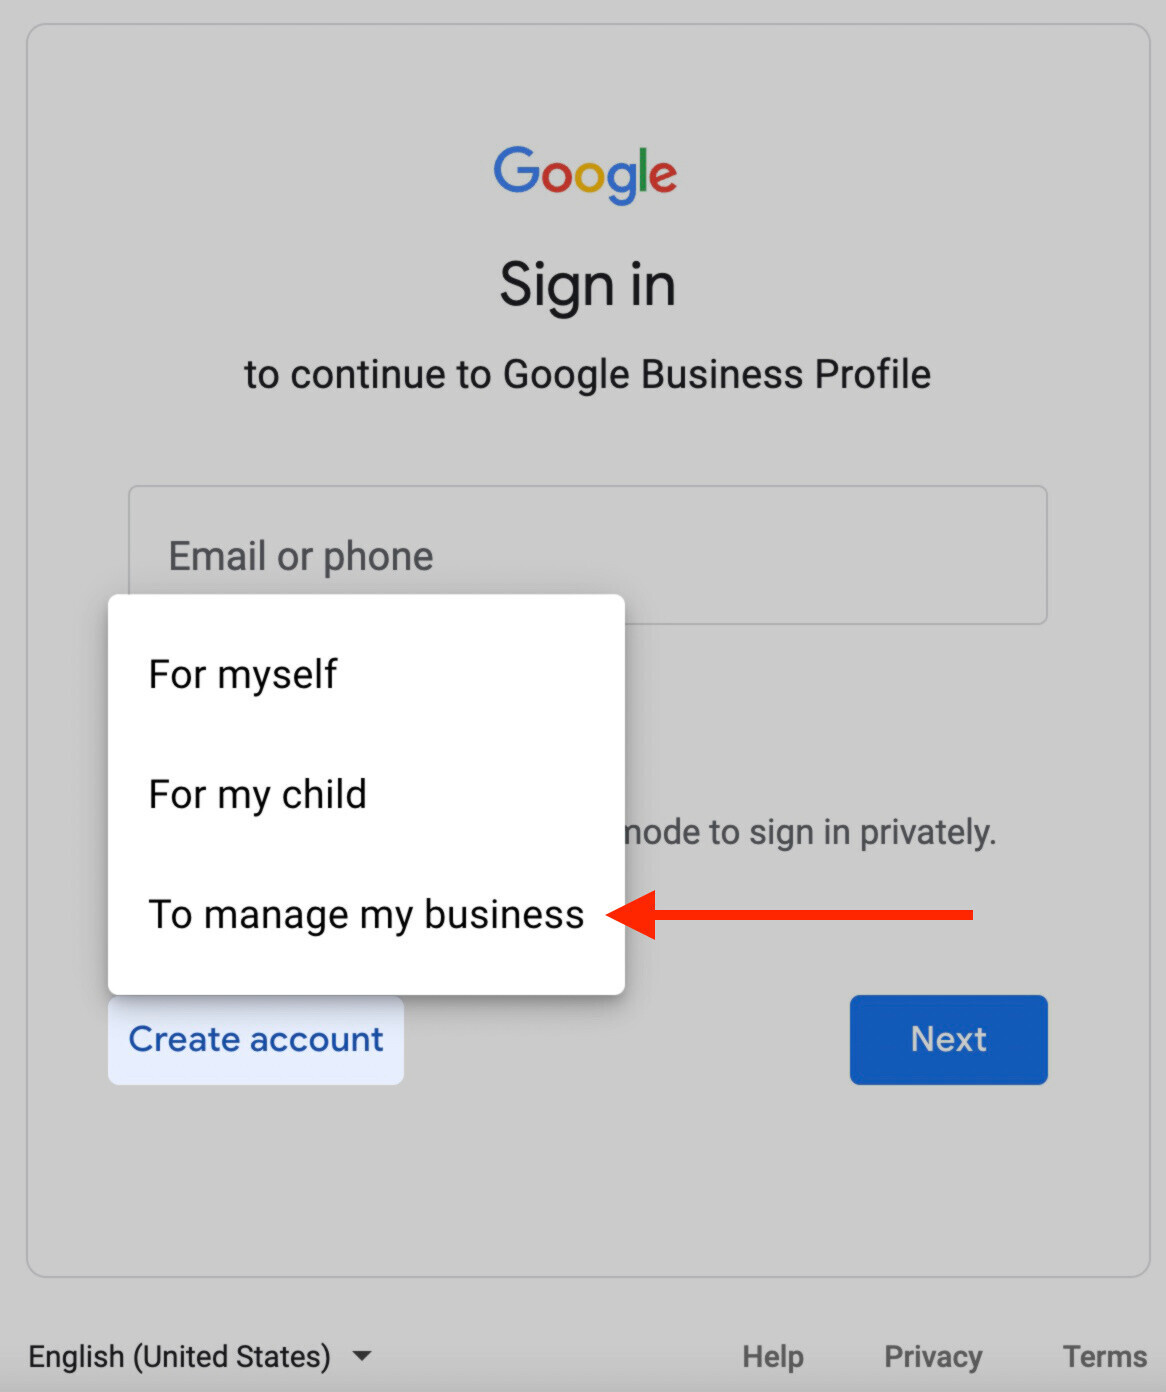 Sign into Google to manage your business